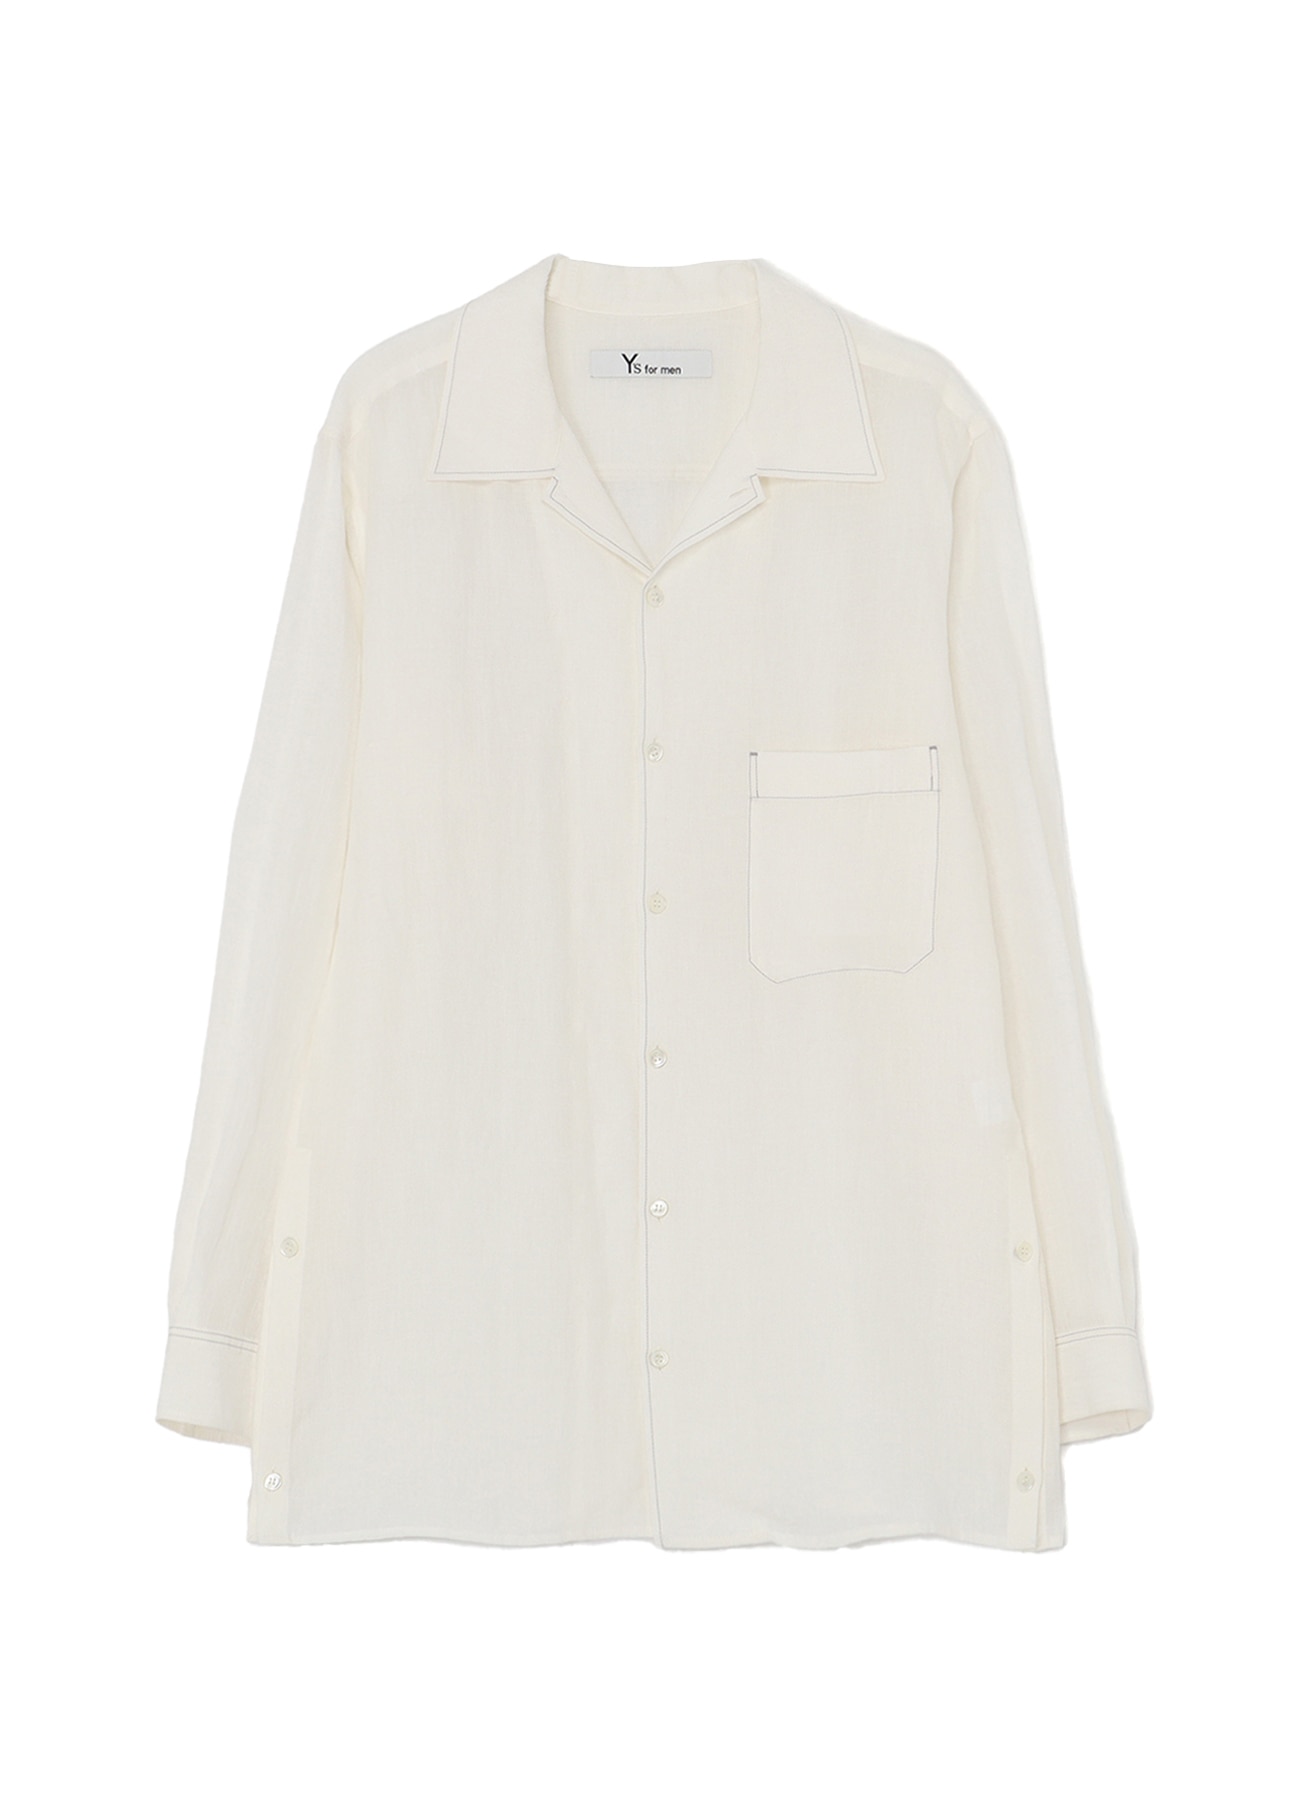 WHITE 60 LINEN LAWN SHIRT WITH OPEN COLLAR AND COLOR COMBI STITCH